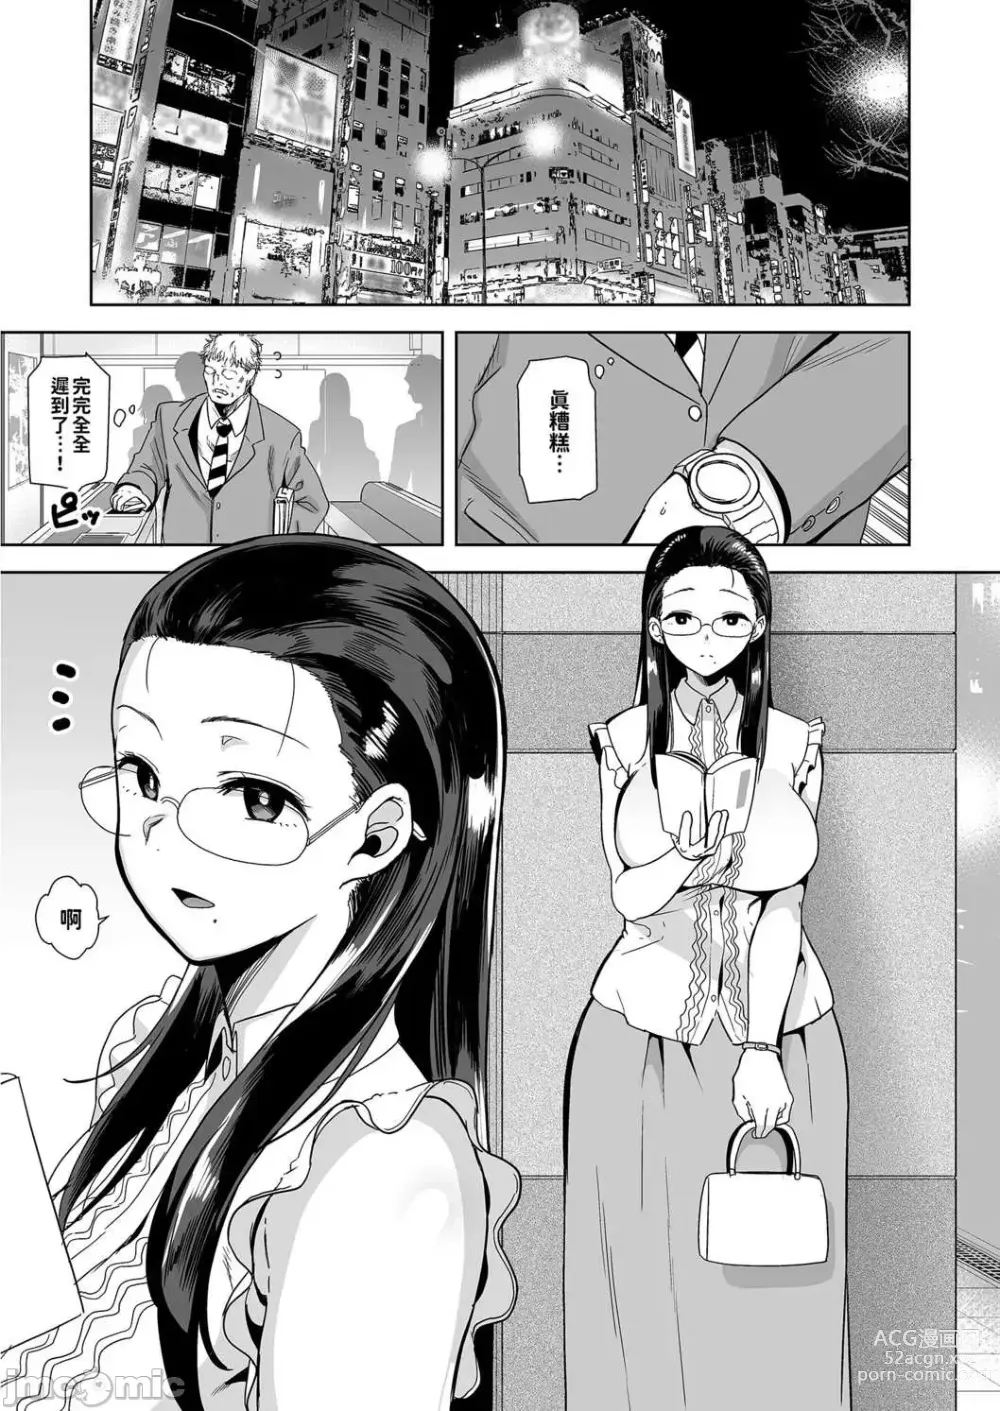 Page 2 of doujinshi Seika Girls Academys Officially Approved Prostitute Man 1 + 2